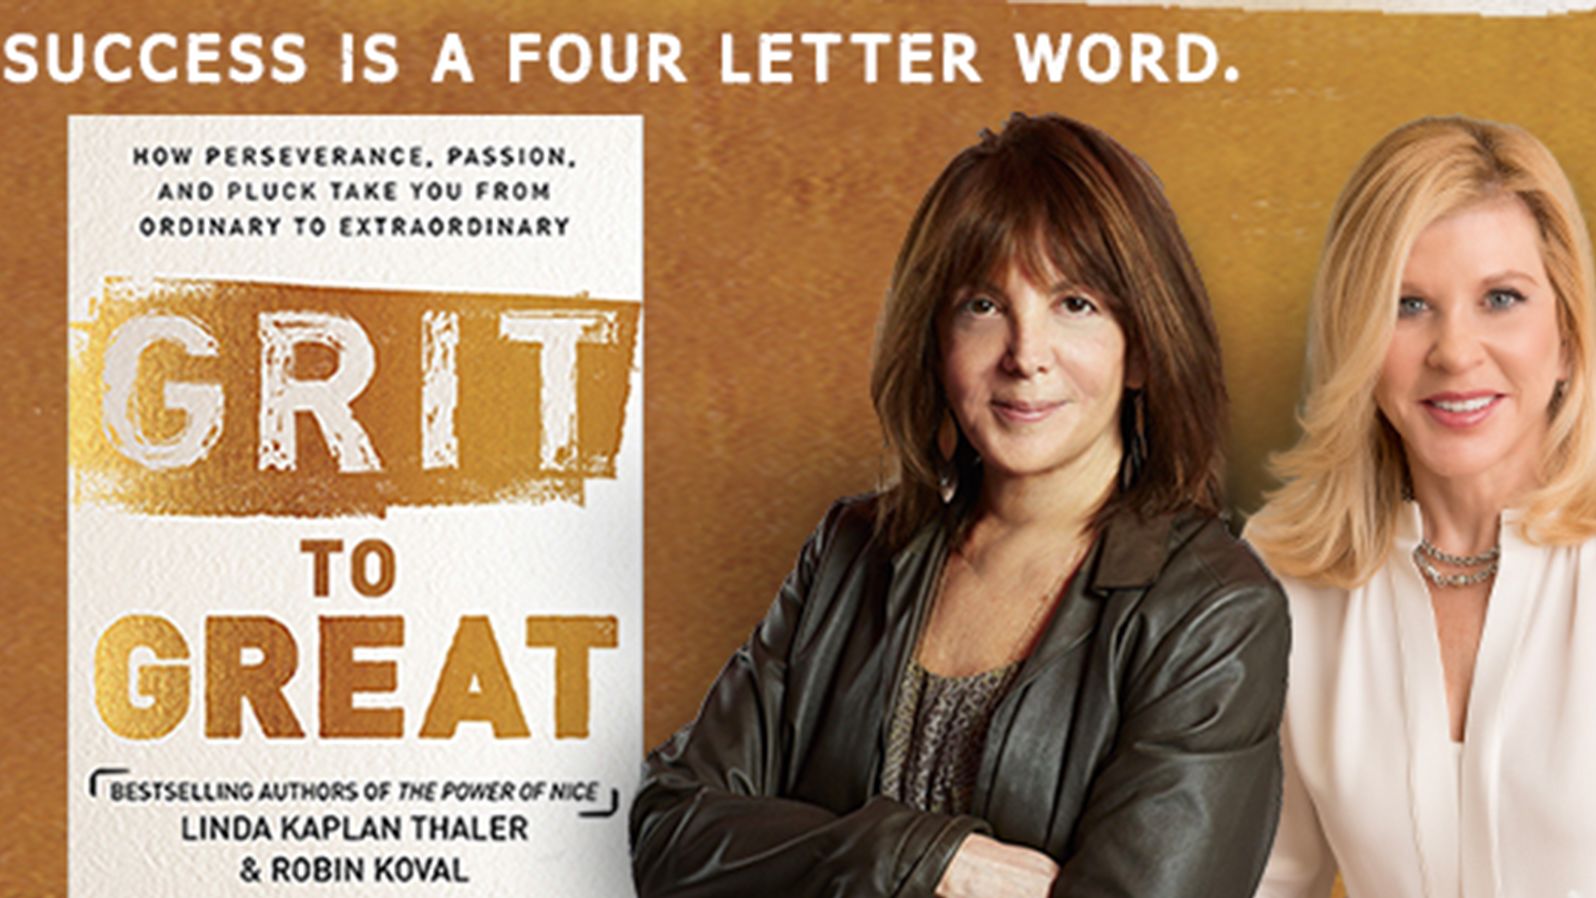 Linda Kaplan Thaler and Robin Koval are co-authors of "Grit to Great."